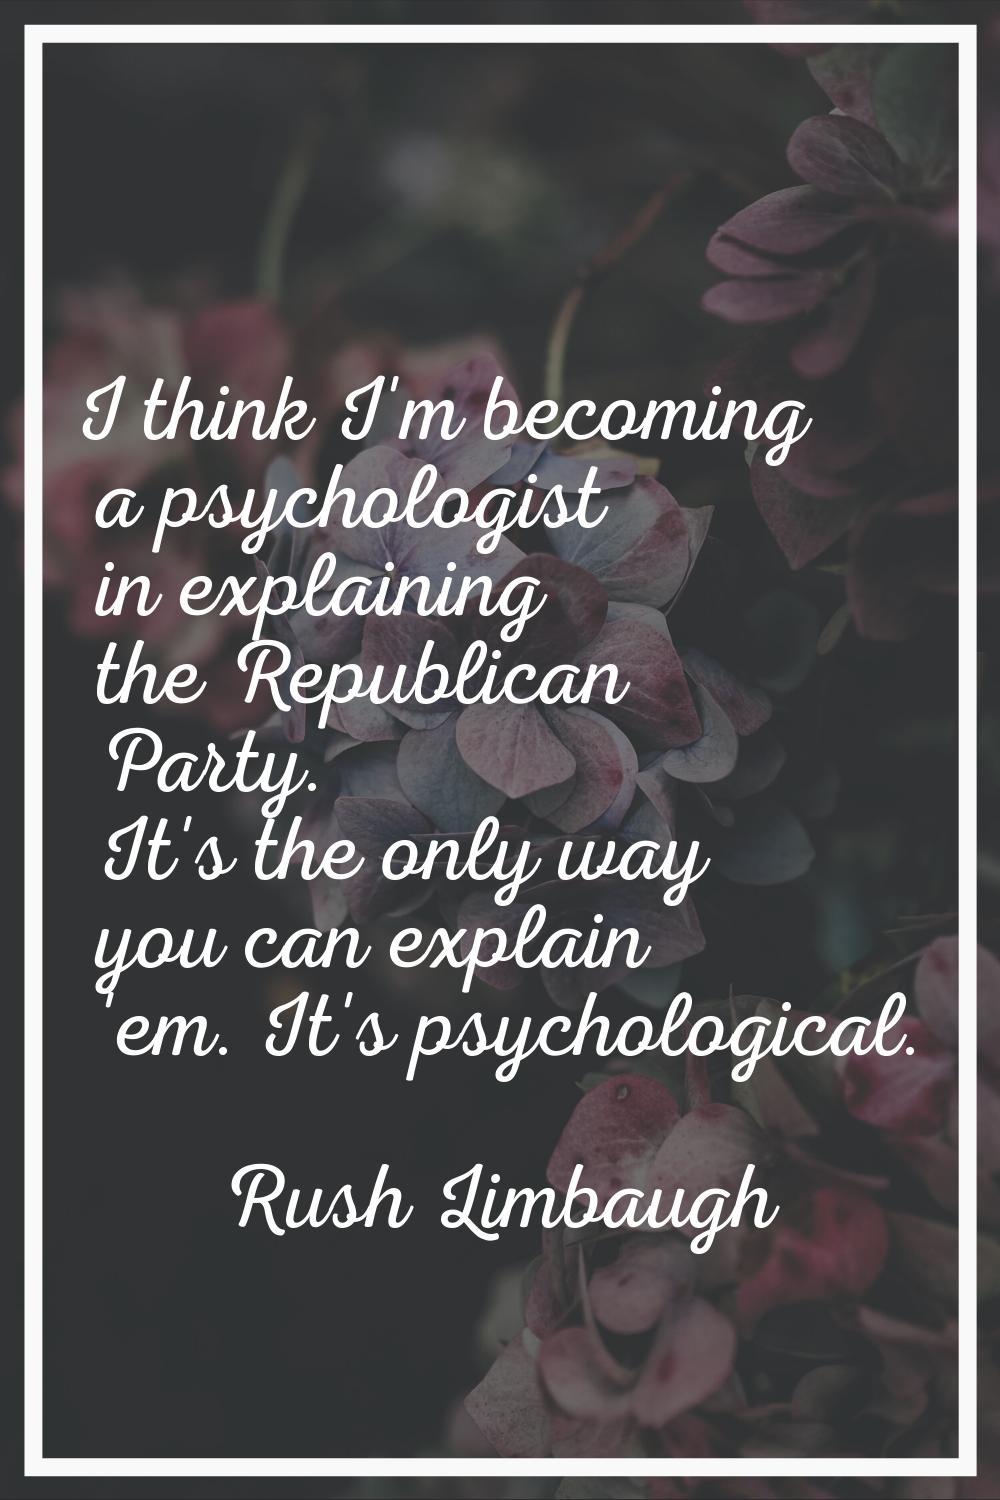 I think I'm becoming a psychologist in explaining the Republican Party. It's the only way you can e